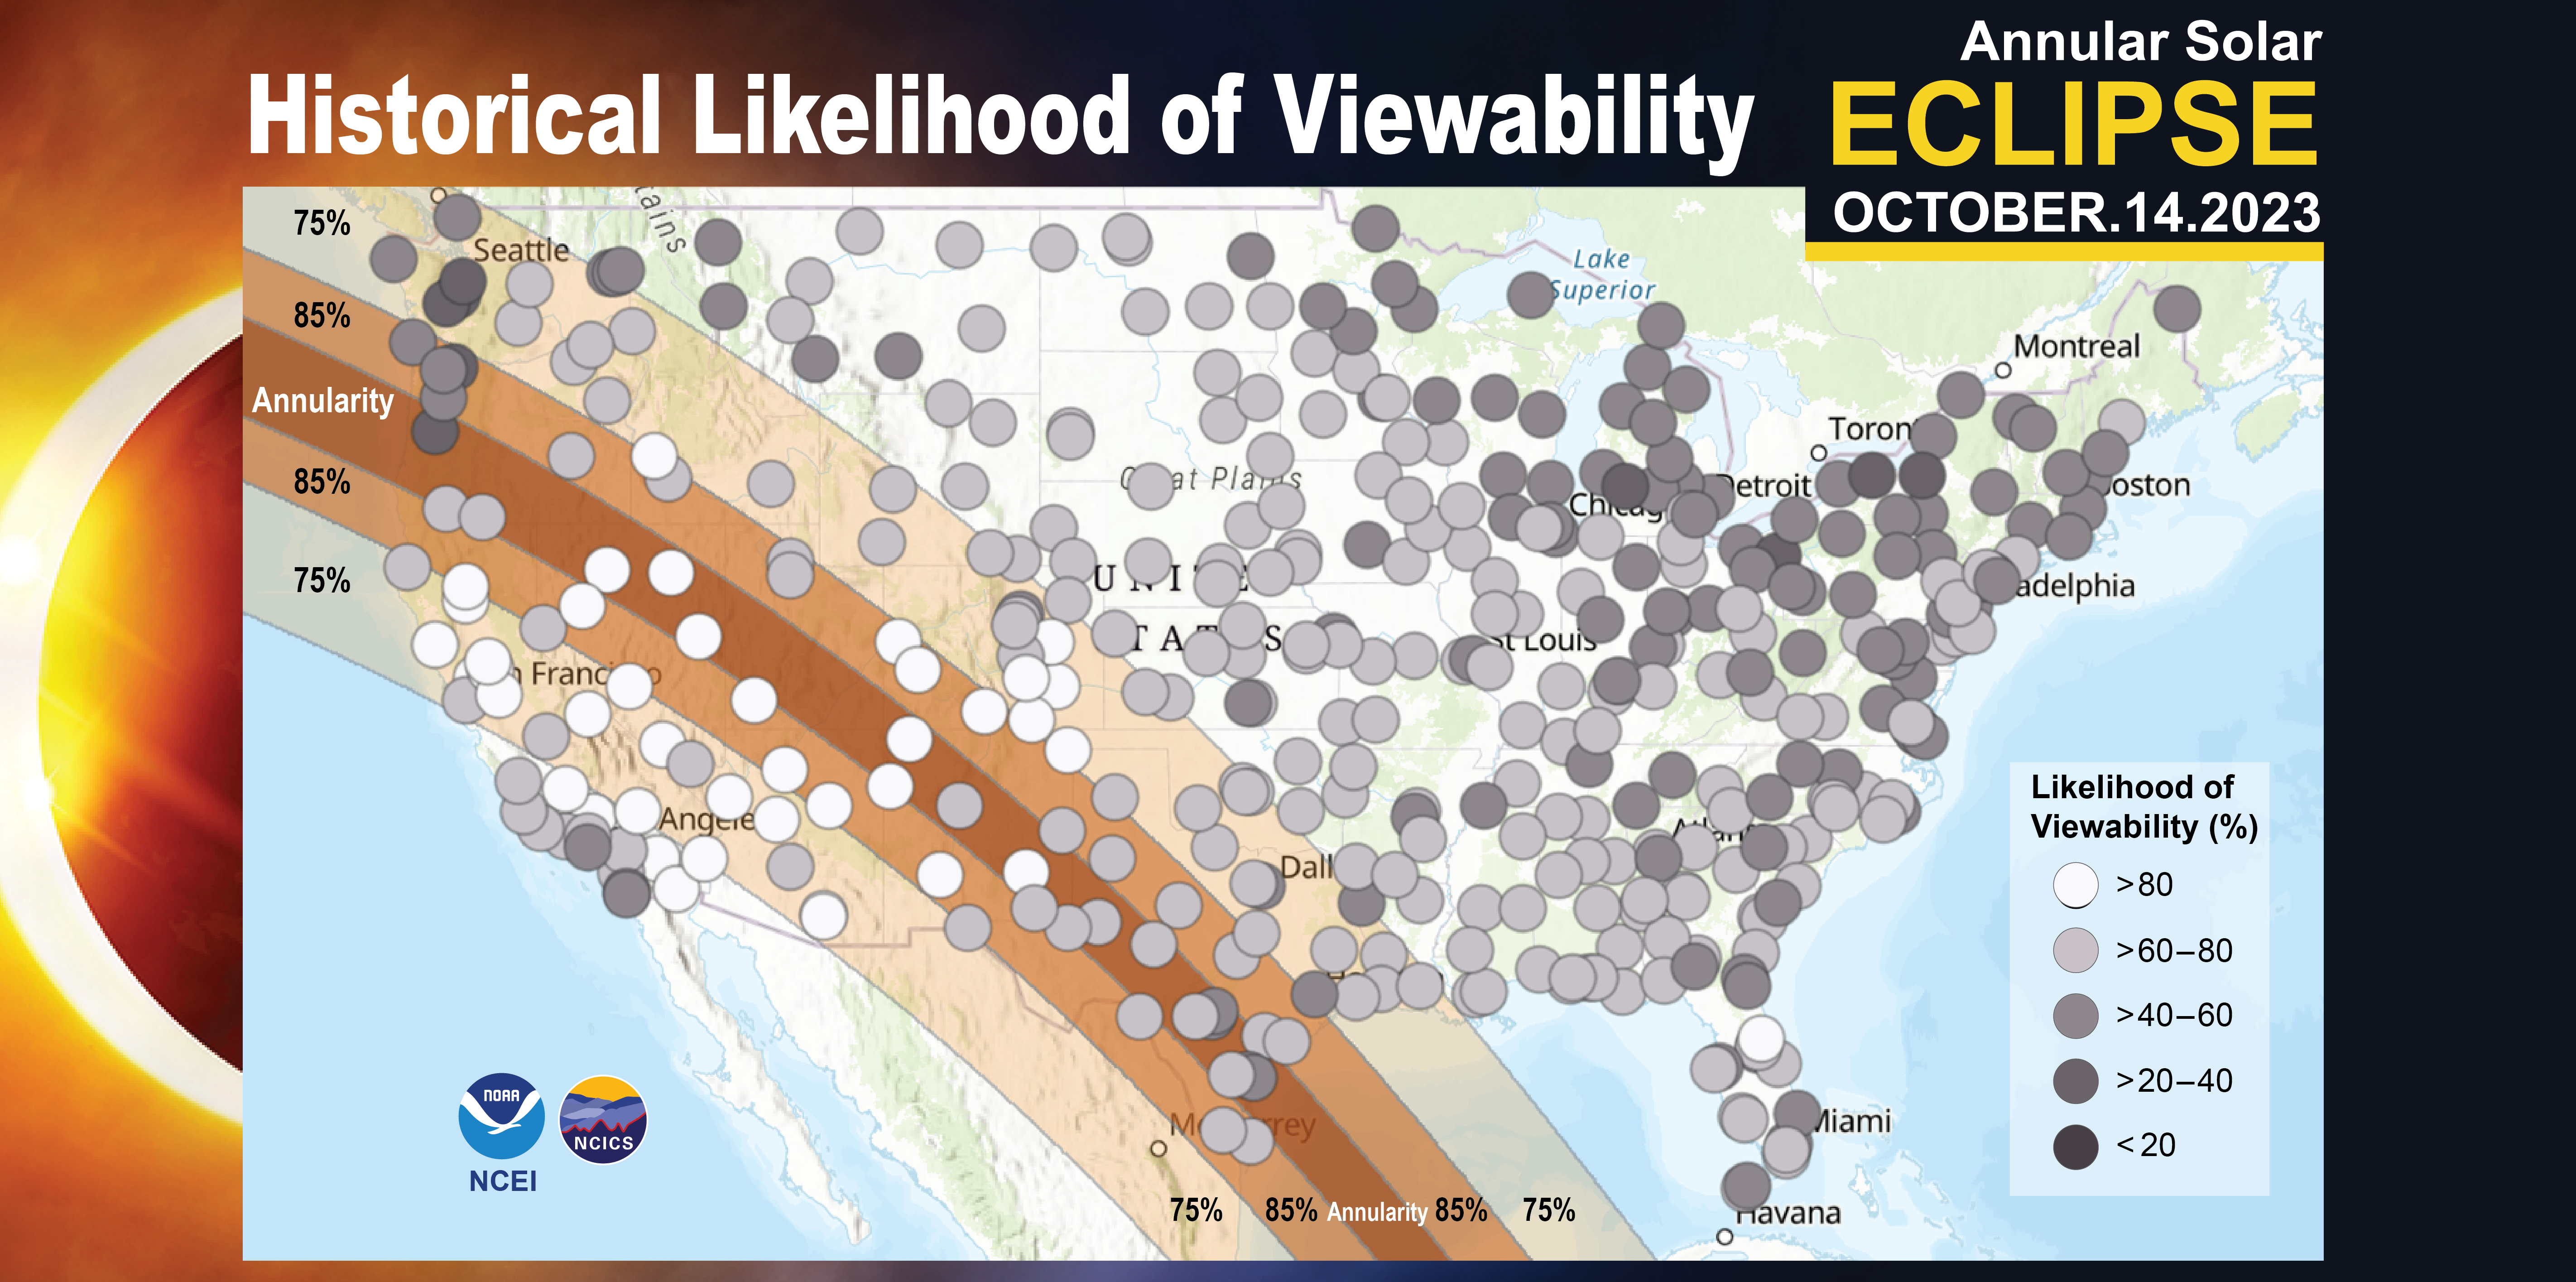 Map of the “Historical Likelihood of Viewability” for the annular solar eclipse on October 14, 2023. The dark orange band stretching from Oregon to Texas shows the path of annularity, the lighter orange band shows 85% of obscuration, and the beige band shows 75% of obscuration.